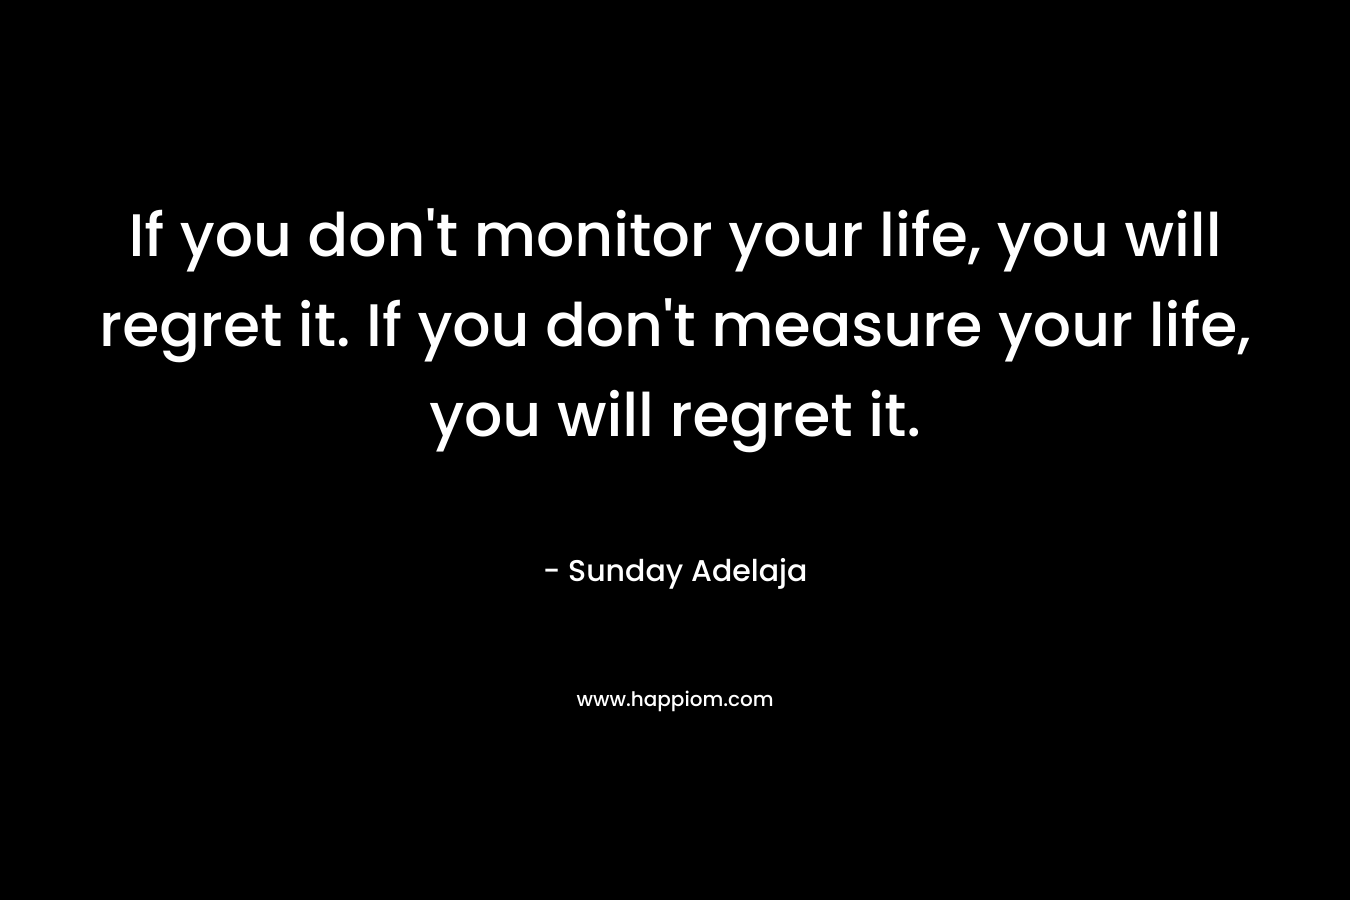 If you don't monitor your life, you will regret it. If you don't measure your life, you will regret it.